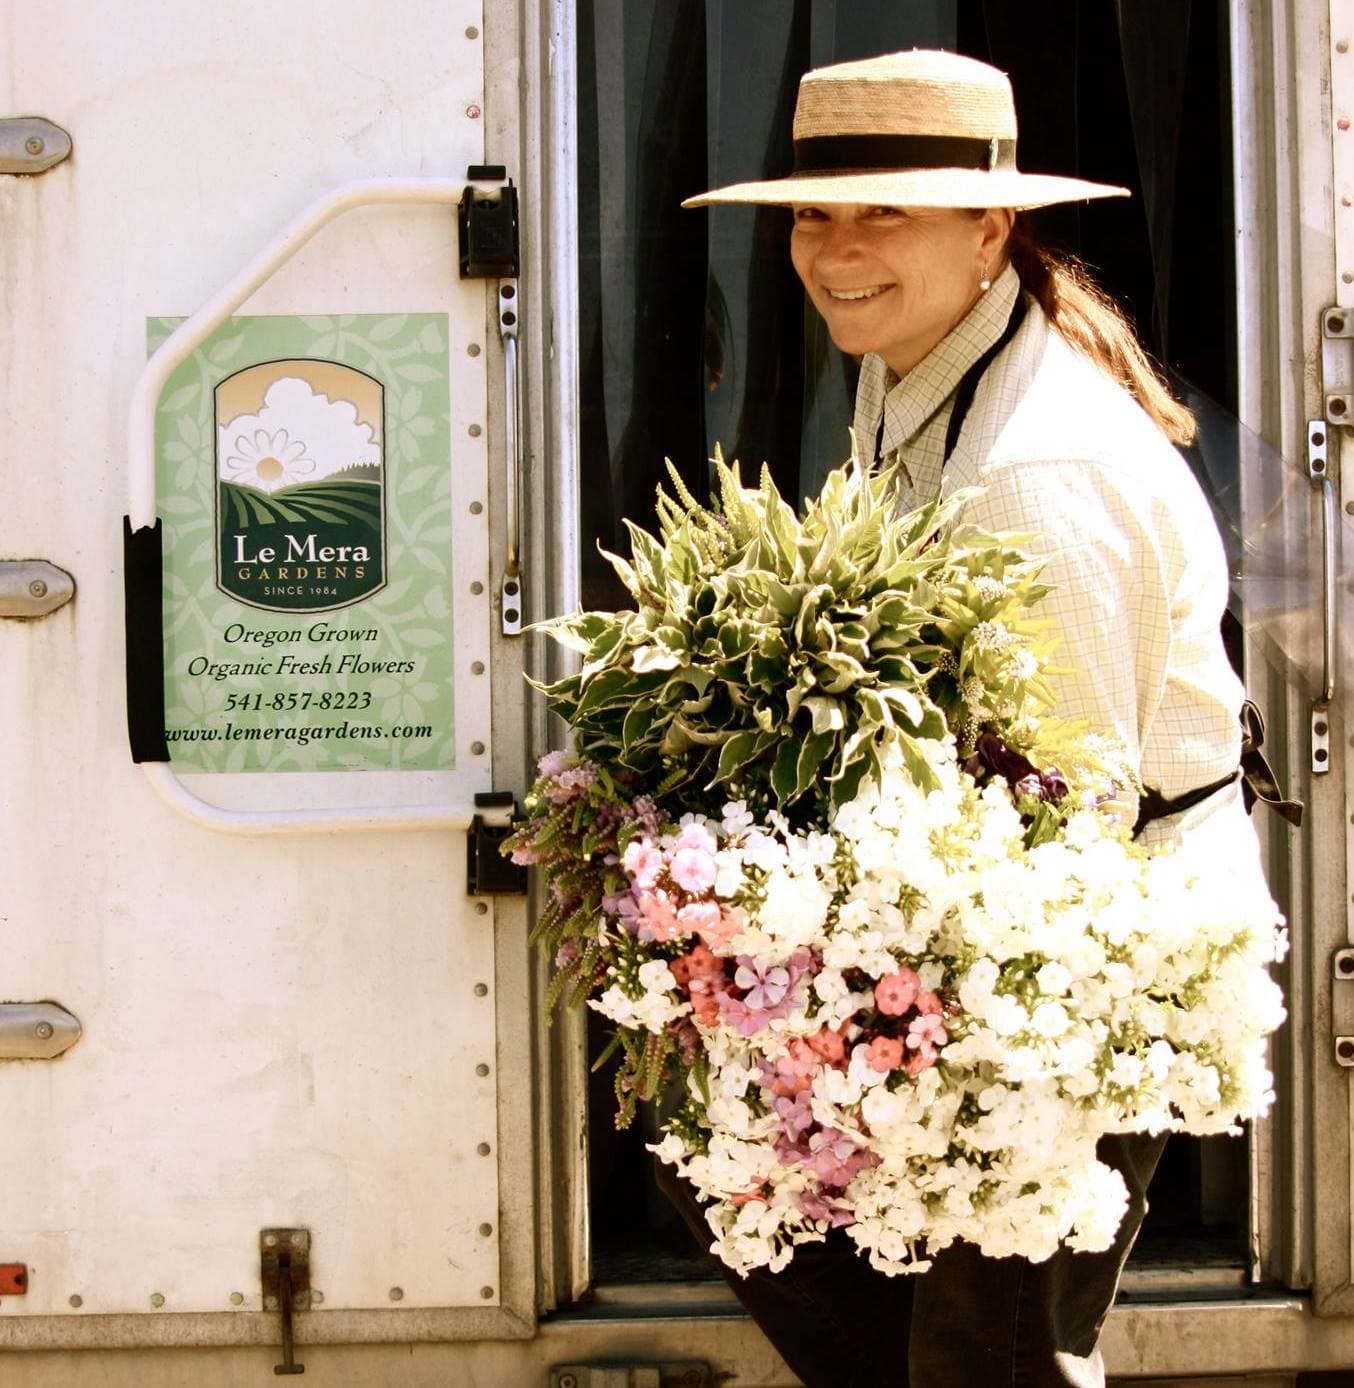 Flower farmer and Slow Flowers advocate Joan Ewer Thorndike wearing a sun hat on the steps of a flower truck holding bunches of bi-colored dogwood foliage, physostegia and phlox freshly harvested from the fields of Le Mera Gardens.  Le Mera Gardens logo and tagline on a sticker adhered to the back wall of the flower truck.